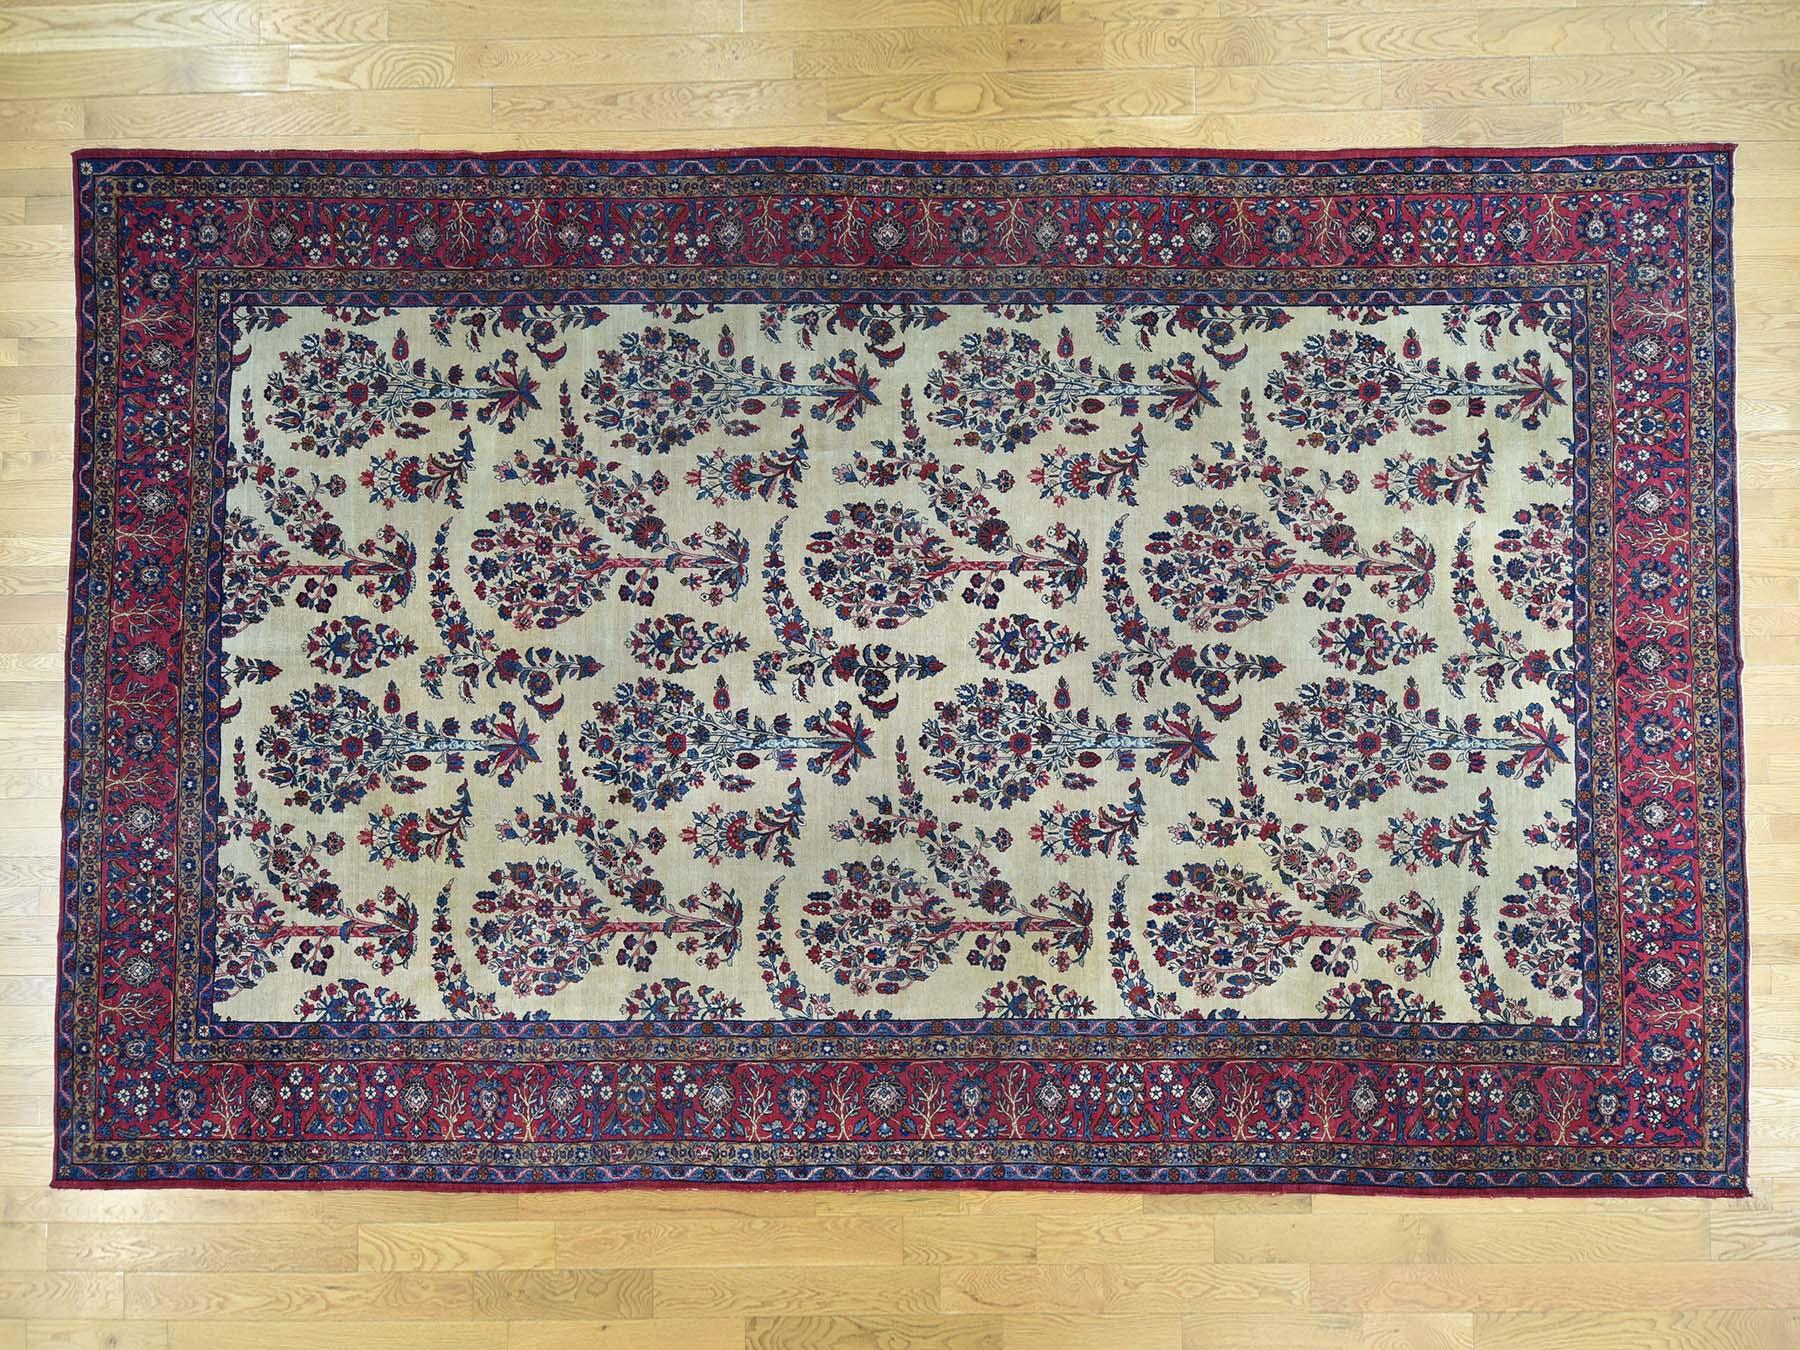 This is a genuine hand knotted oriental rug. It is not hand tufted or machine made rug. Our entire inventory is made of either hand knotted or handwoven rugs.

Revive your home style with this beautiful handmade carpet. This handcrafted gallery size